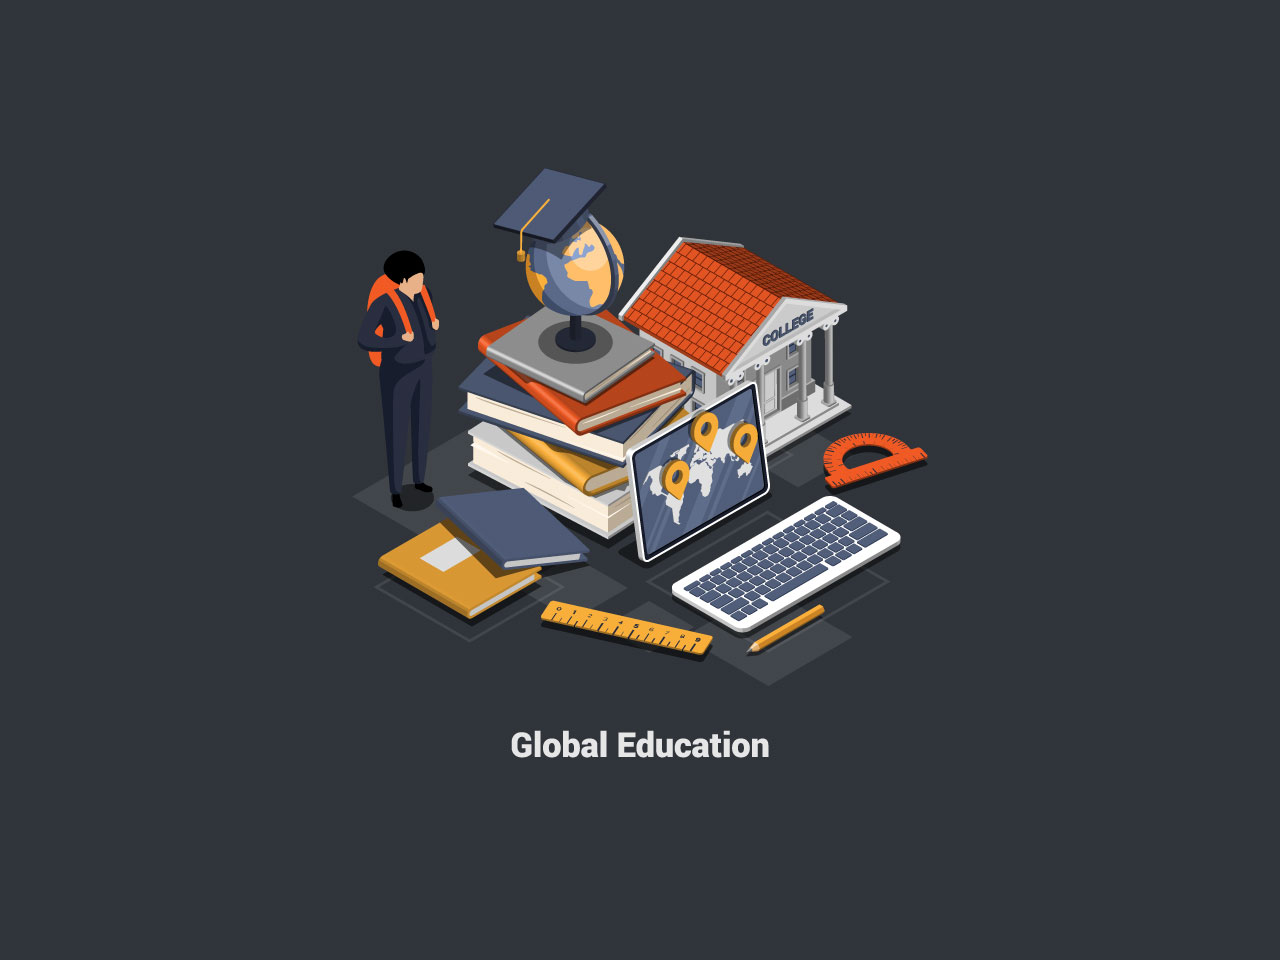 Elearning distance graduate certificate program boy student with backpack near stack books globe computer college building internet education course degree isometric 3d illustration